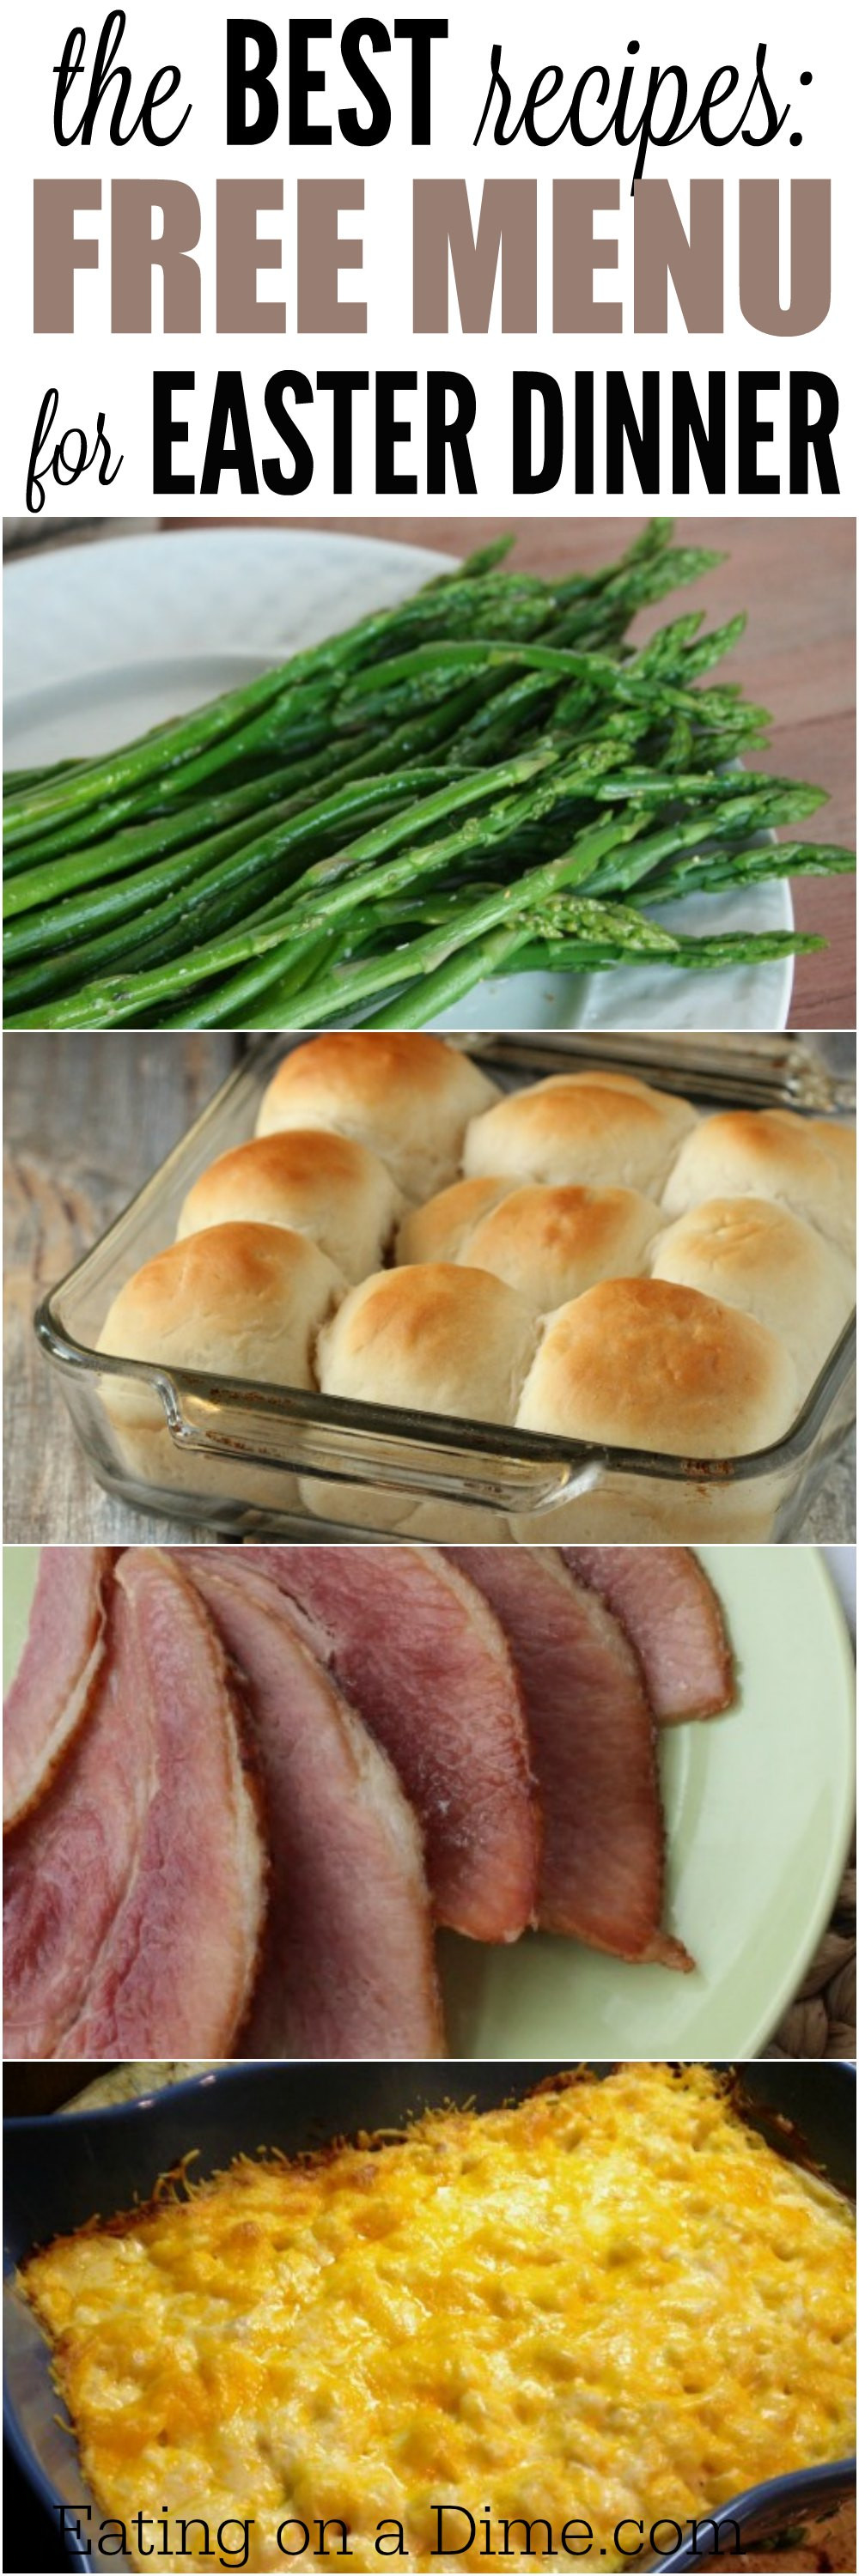 Easter Dinner Take Out 20 Of the Best Ideas for Easter Menu Ideas and Recipes the Best Easter Dinner Recipes